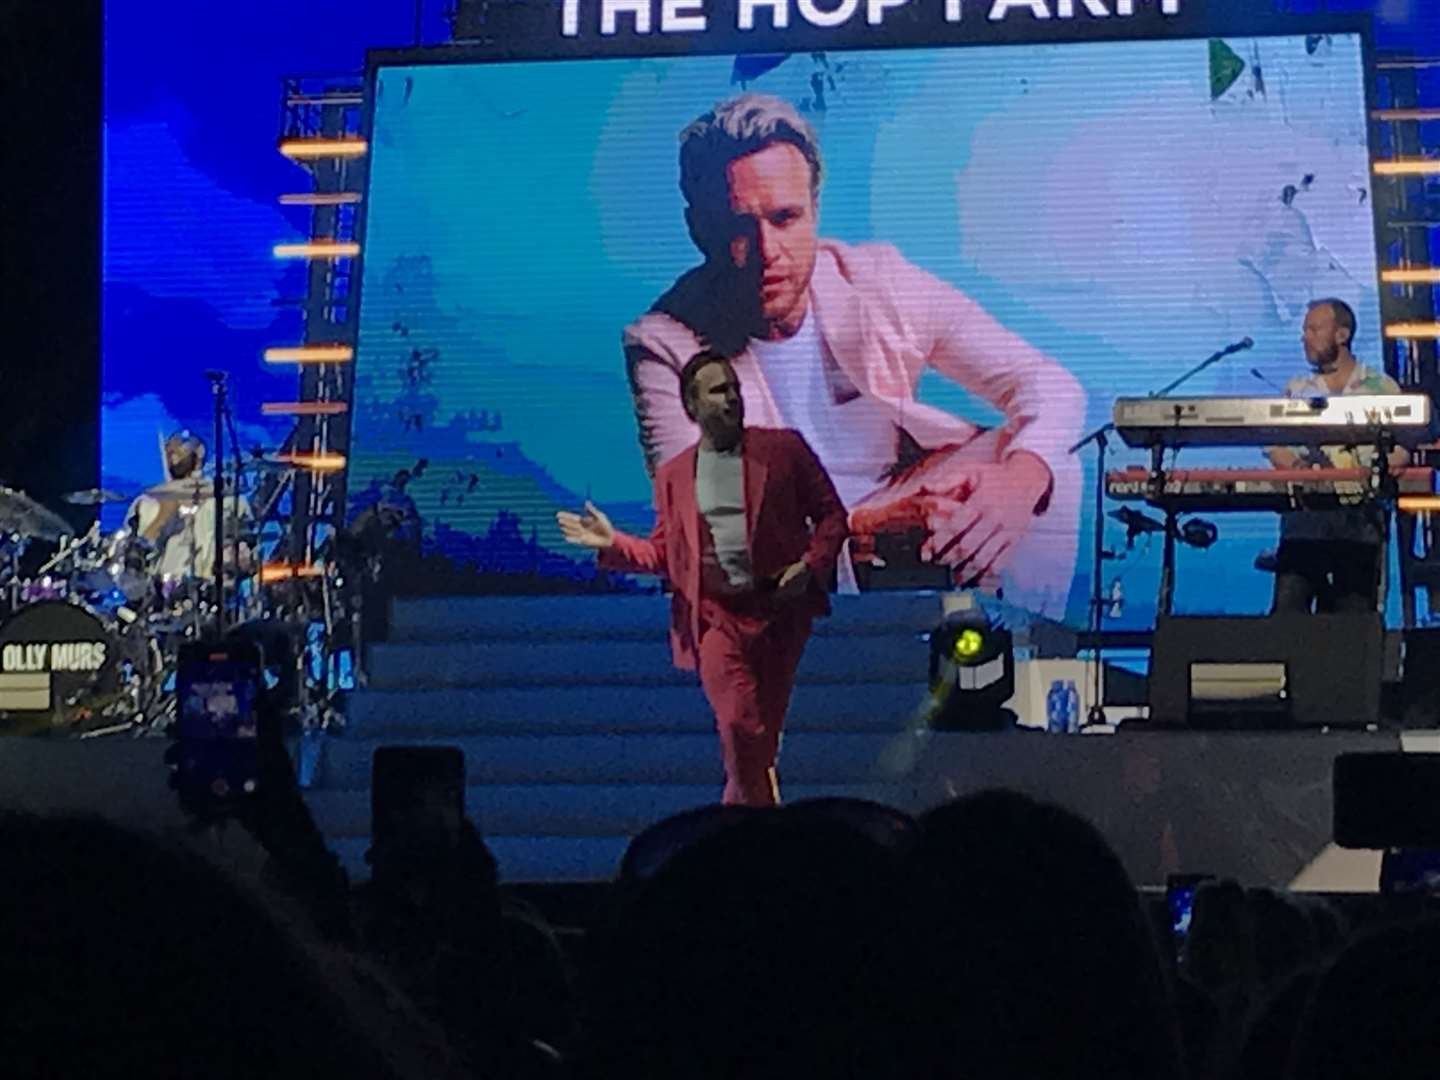 Thousands of fans flocked to see Olly Murs